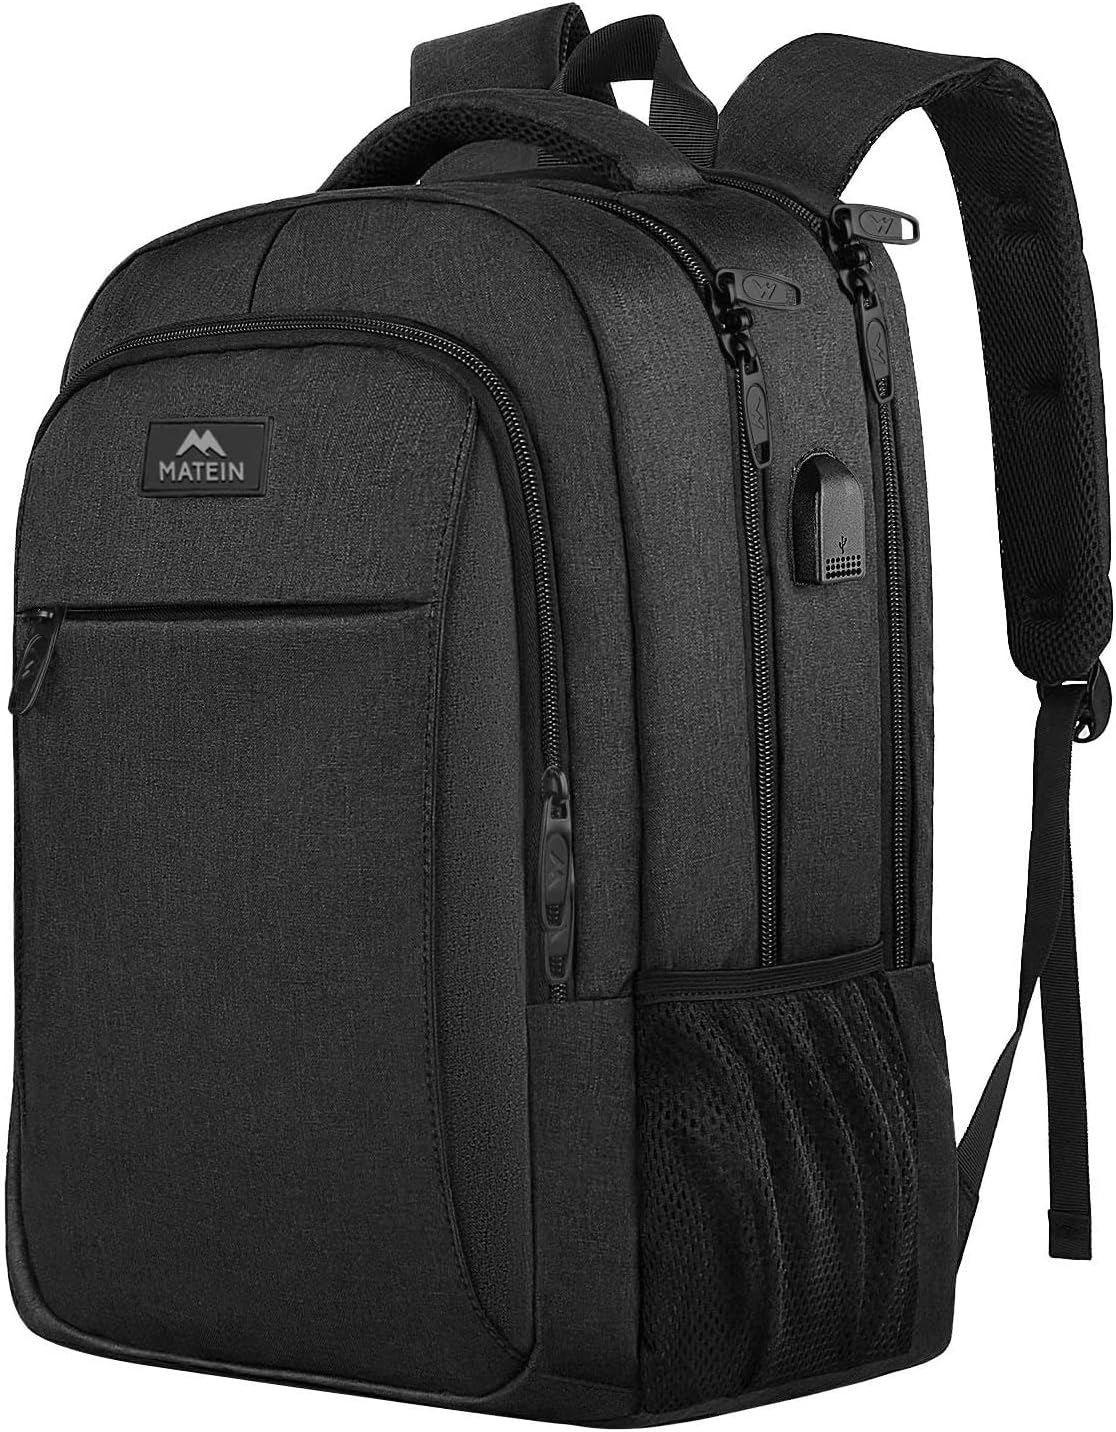 Travel Laptop Backpack,Business Anti Theft Slim Durable Laptops Backpack with USB Charging Port,Water Resistant College School Computer Bag for Women & Men Fits 15.6 Inch Laptop and Notebook